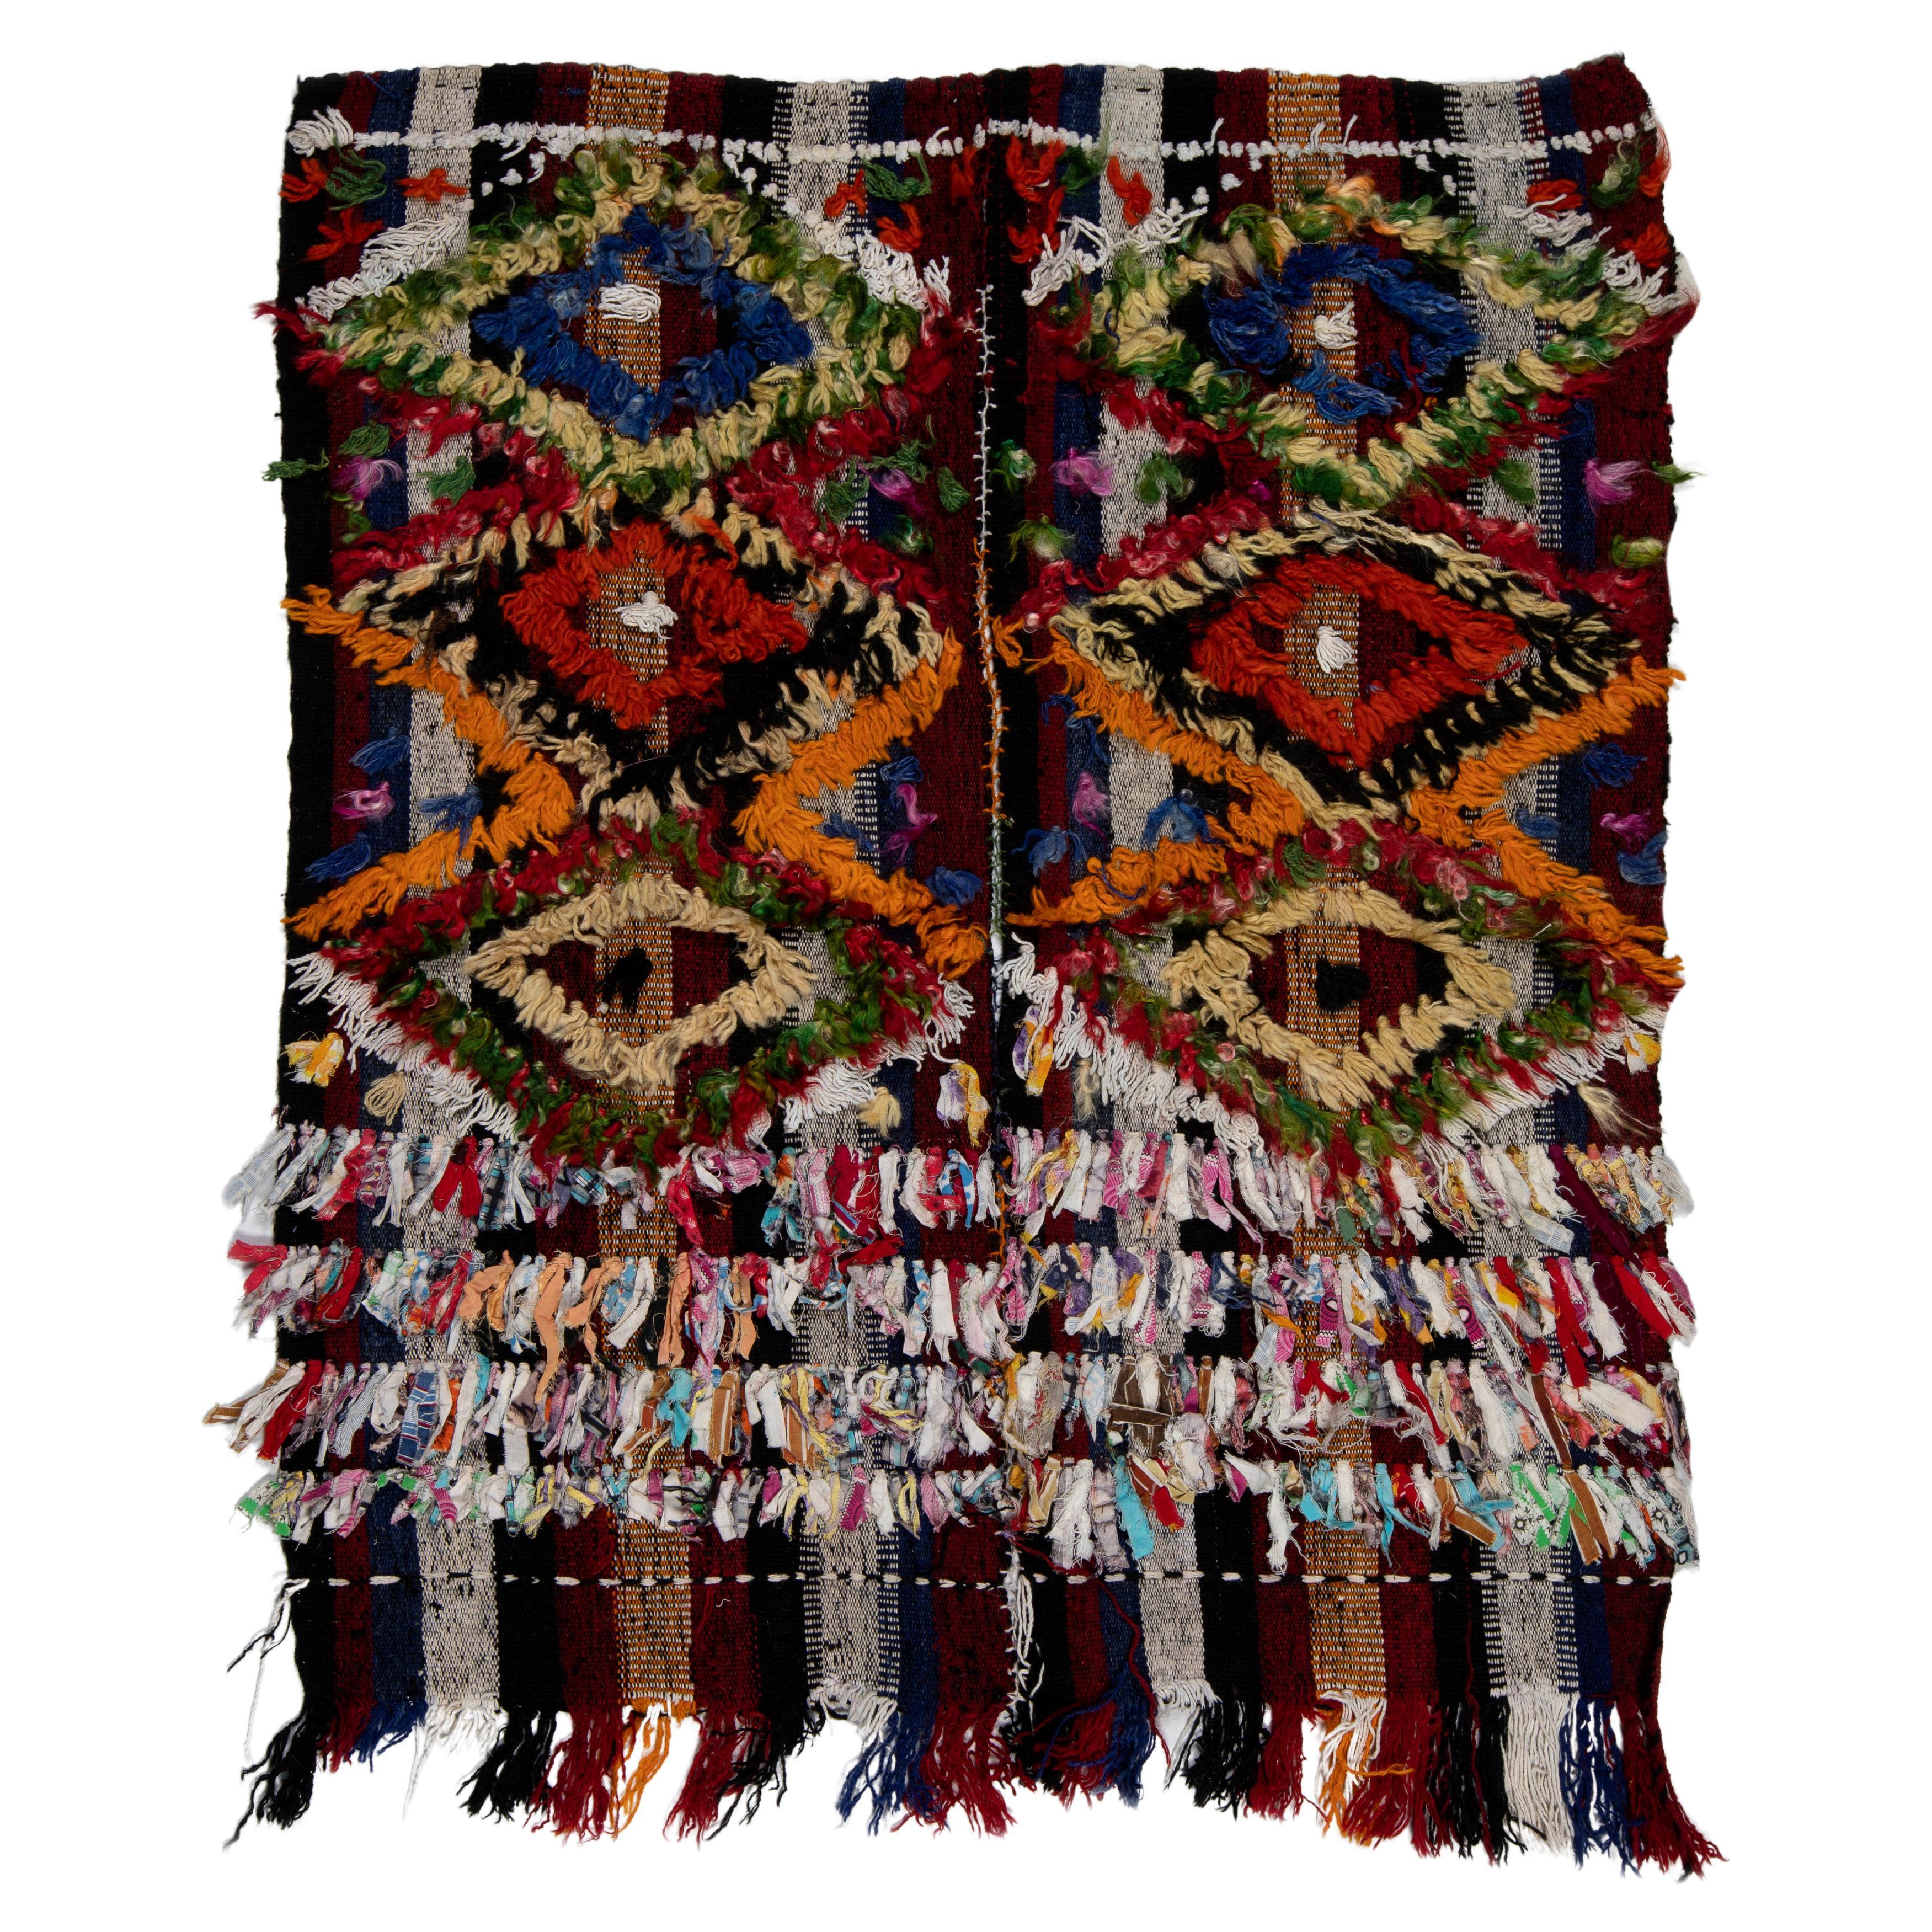 3x3.5 Ft Handmade Turkish 1970s Kilim with Colorful Poms. Bed, Floor, Sofa Cover For Sale